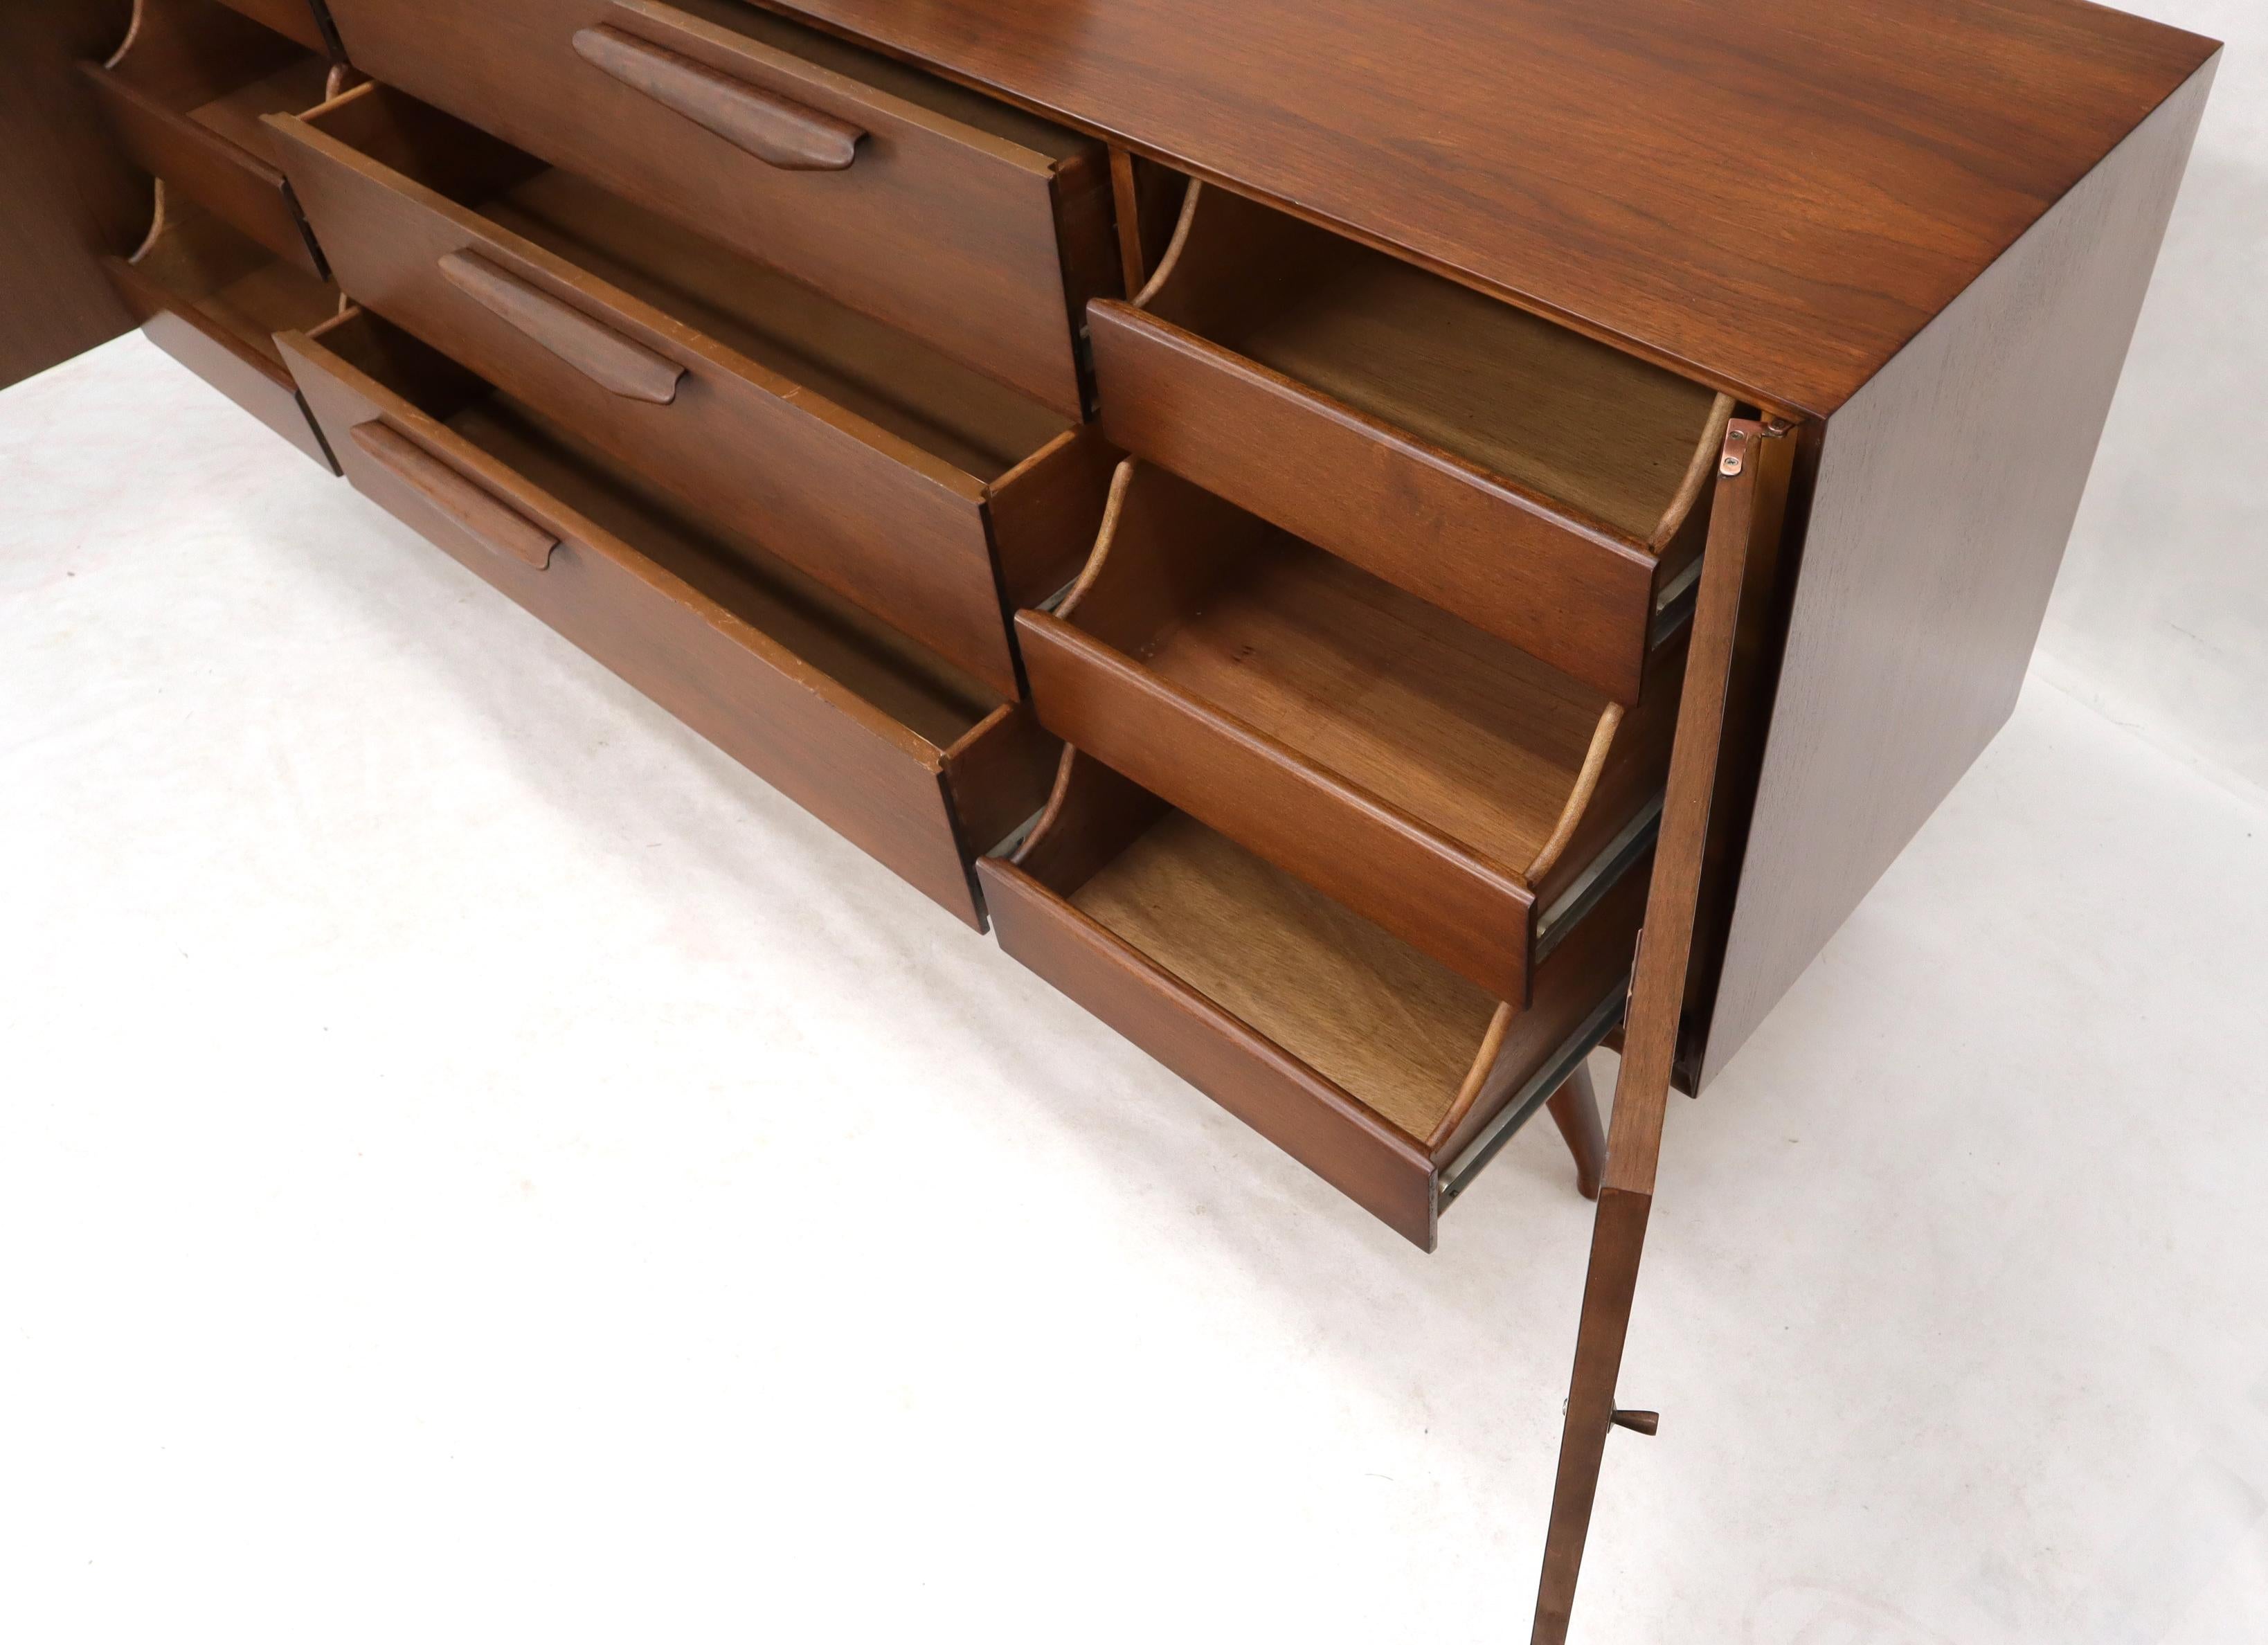 Sculptural Legs Long 9 Drawers Walnut Credenza Dresser with Doors For Sale 1